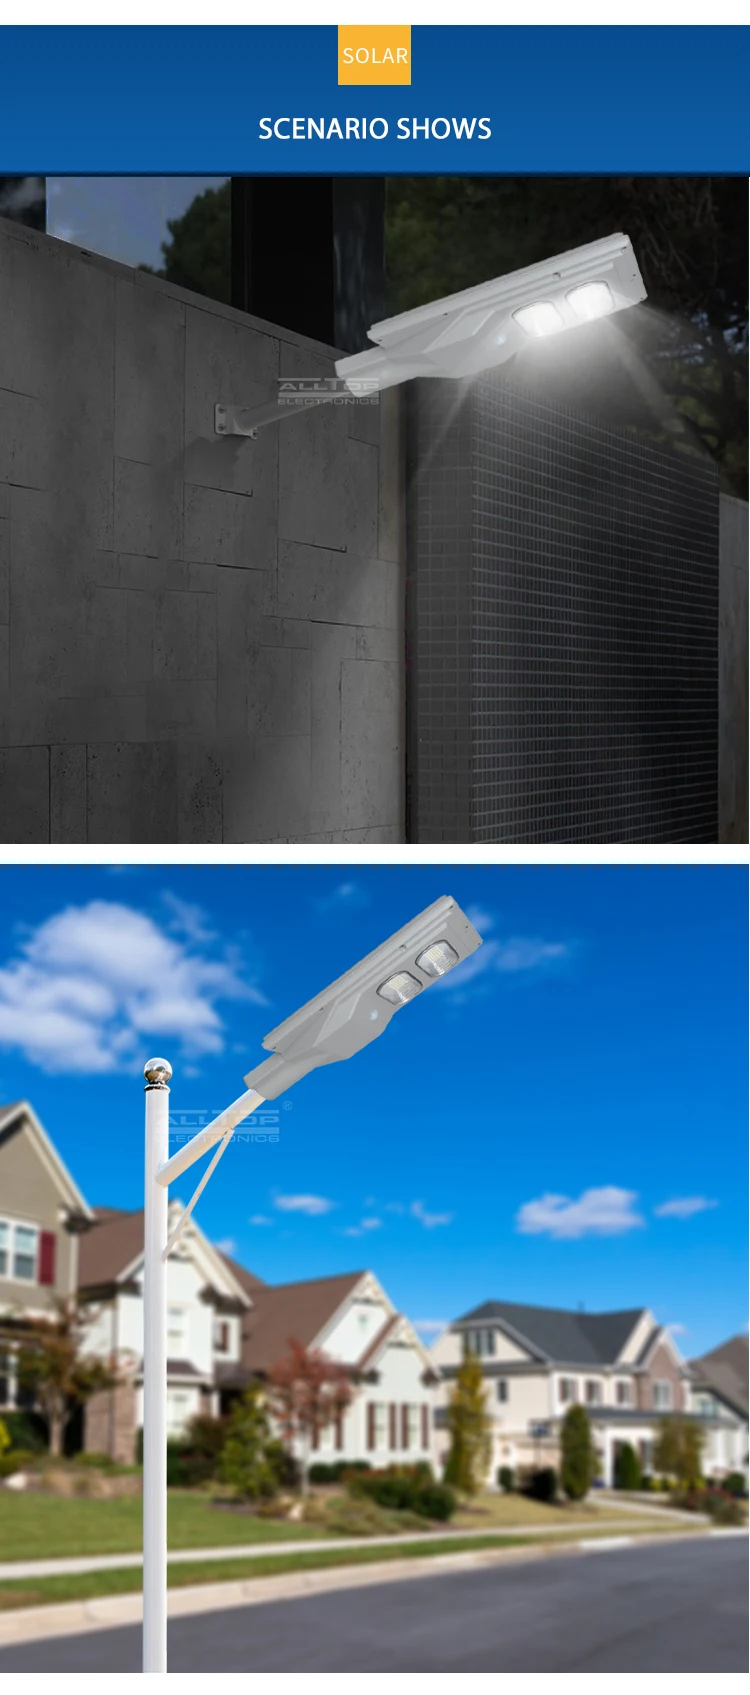 ALLTOP High brightness outdoor lighting IP65 aluminum 30w 60w 90w 120w 150w integrated all in one led solar street light